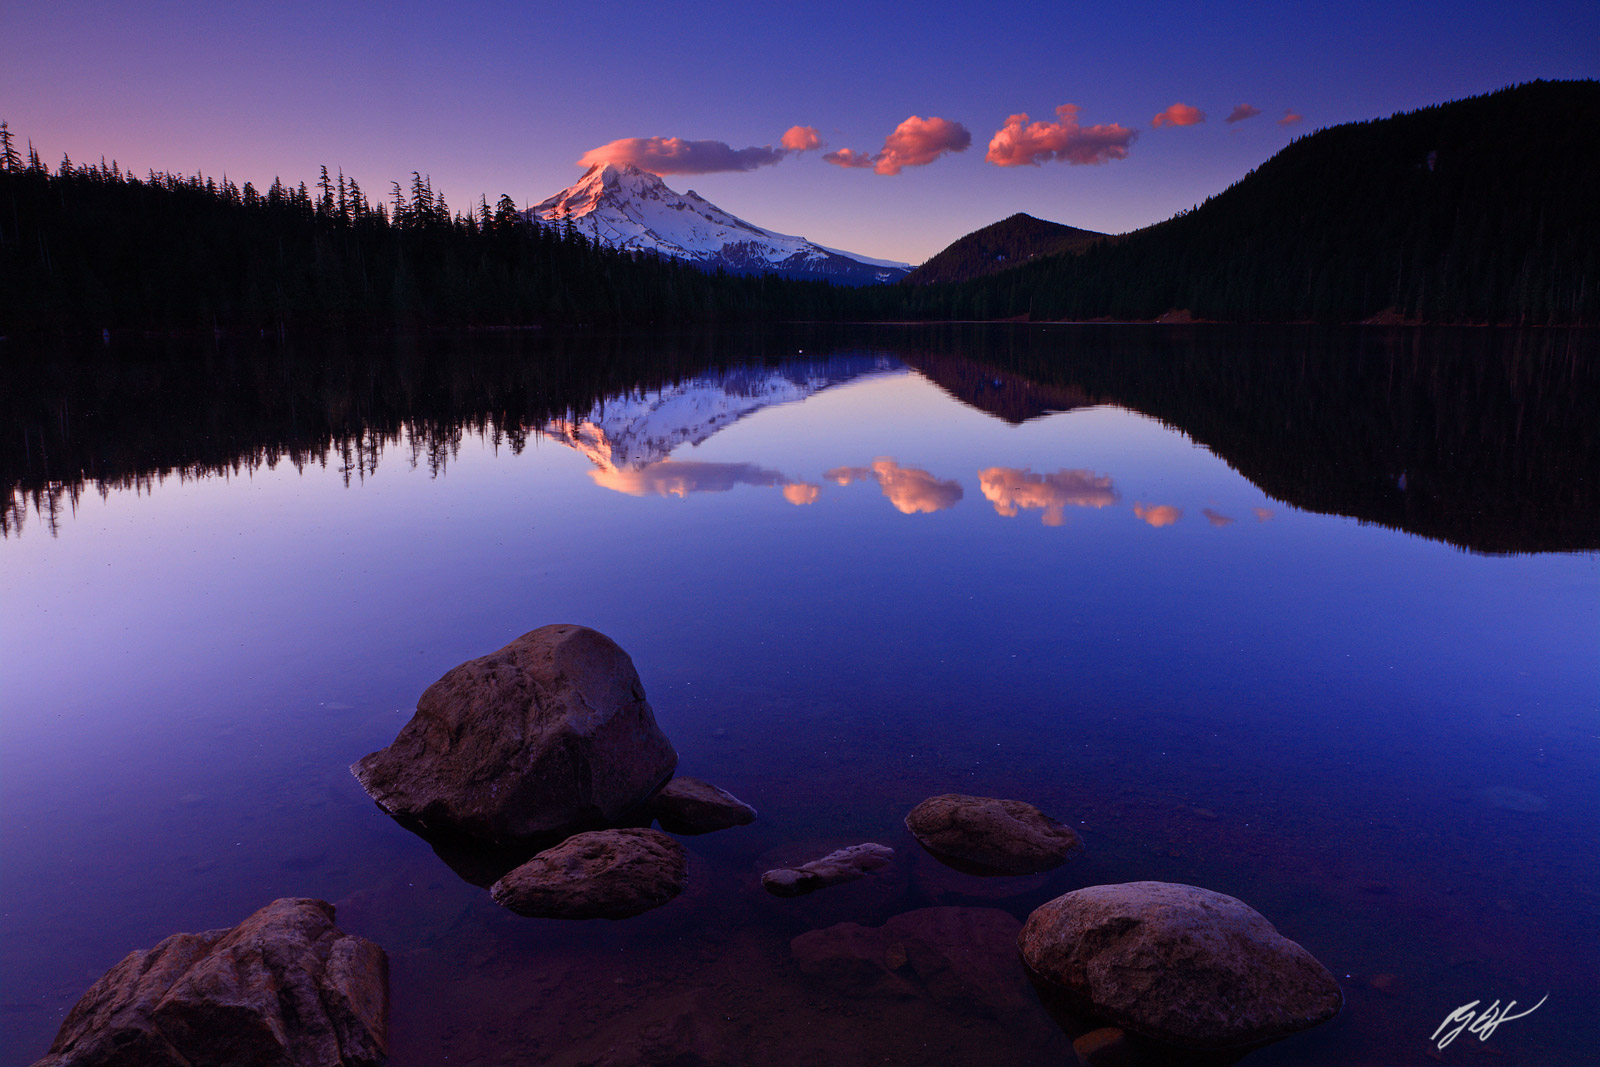 Sunrise Mt Hood Reflected in Lost Lake in the Mt Hood National Forest in Oregon